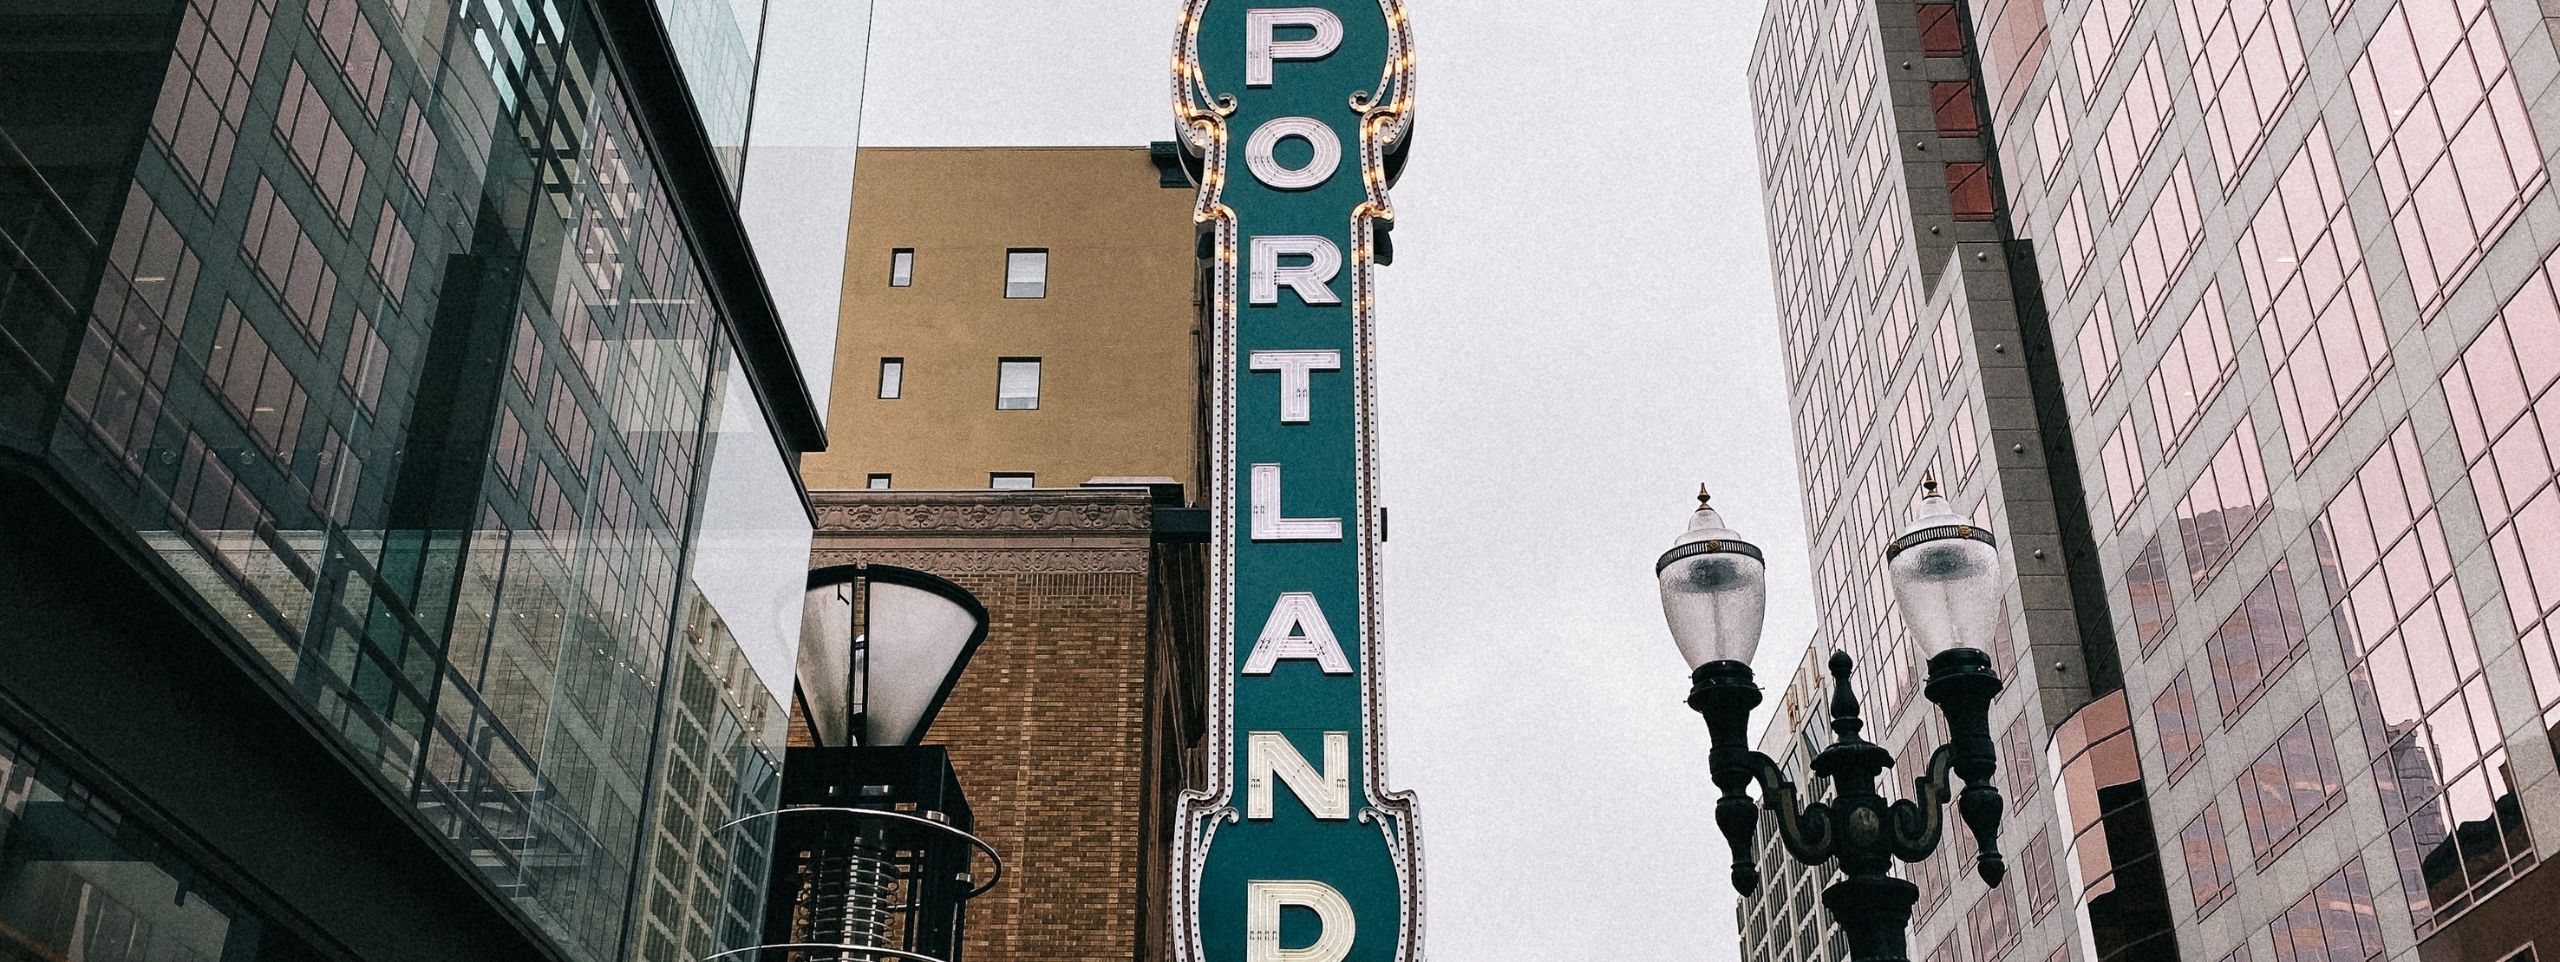 A picture of the Portland sign outside of the Arlene-Schnitzer concert hall